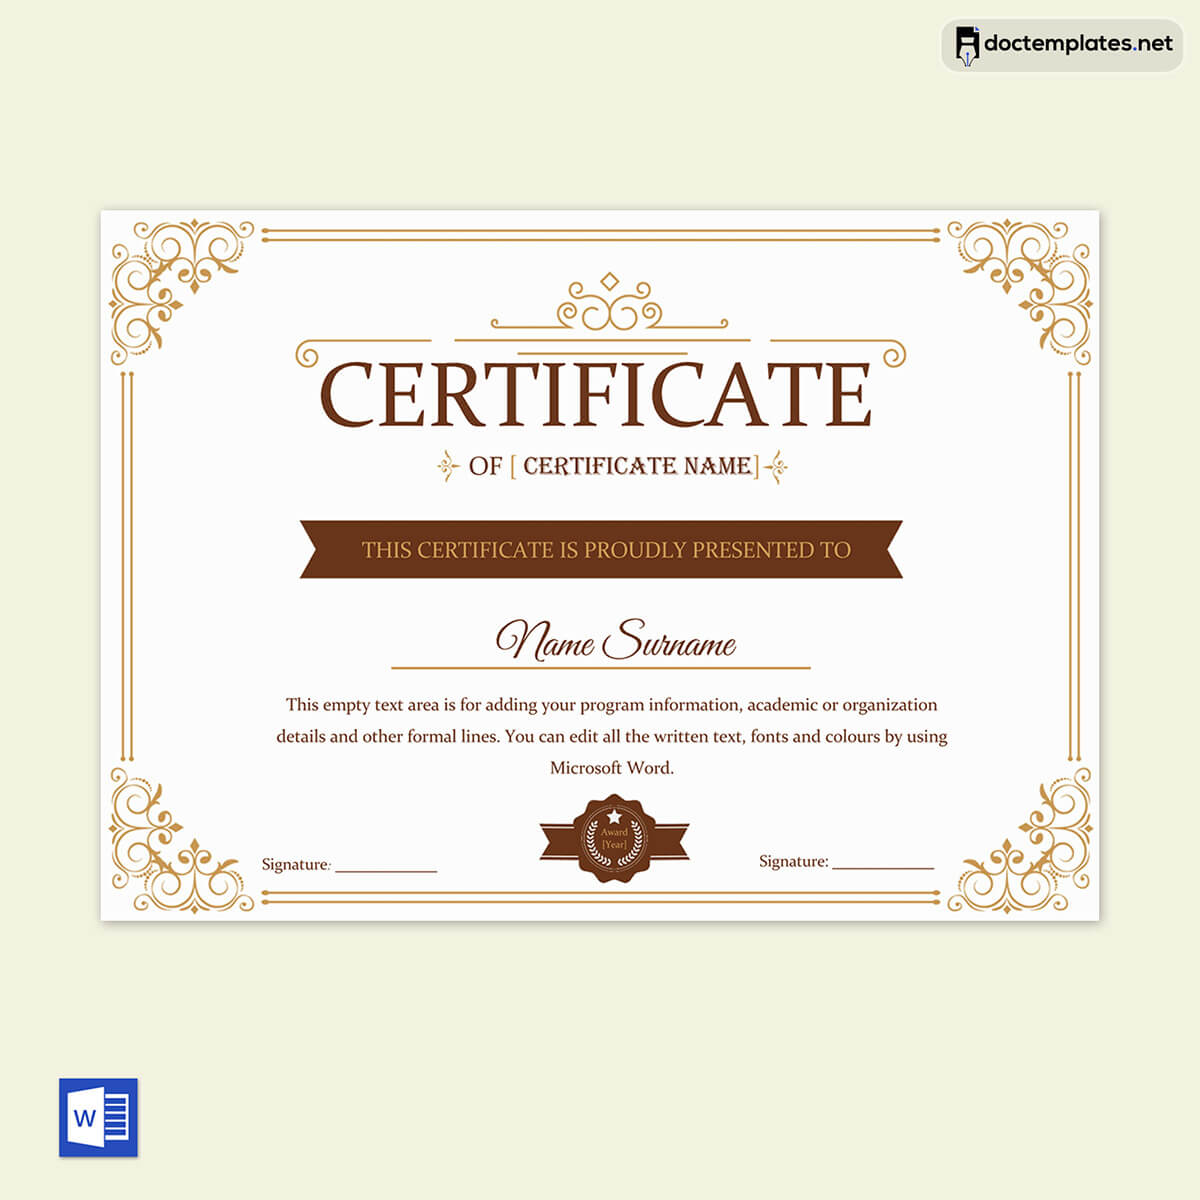 Image of Certificate of Appreciation for event organizer
Certificate of Appreciation for event organizer
